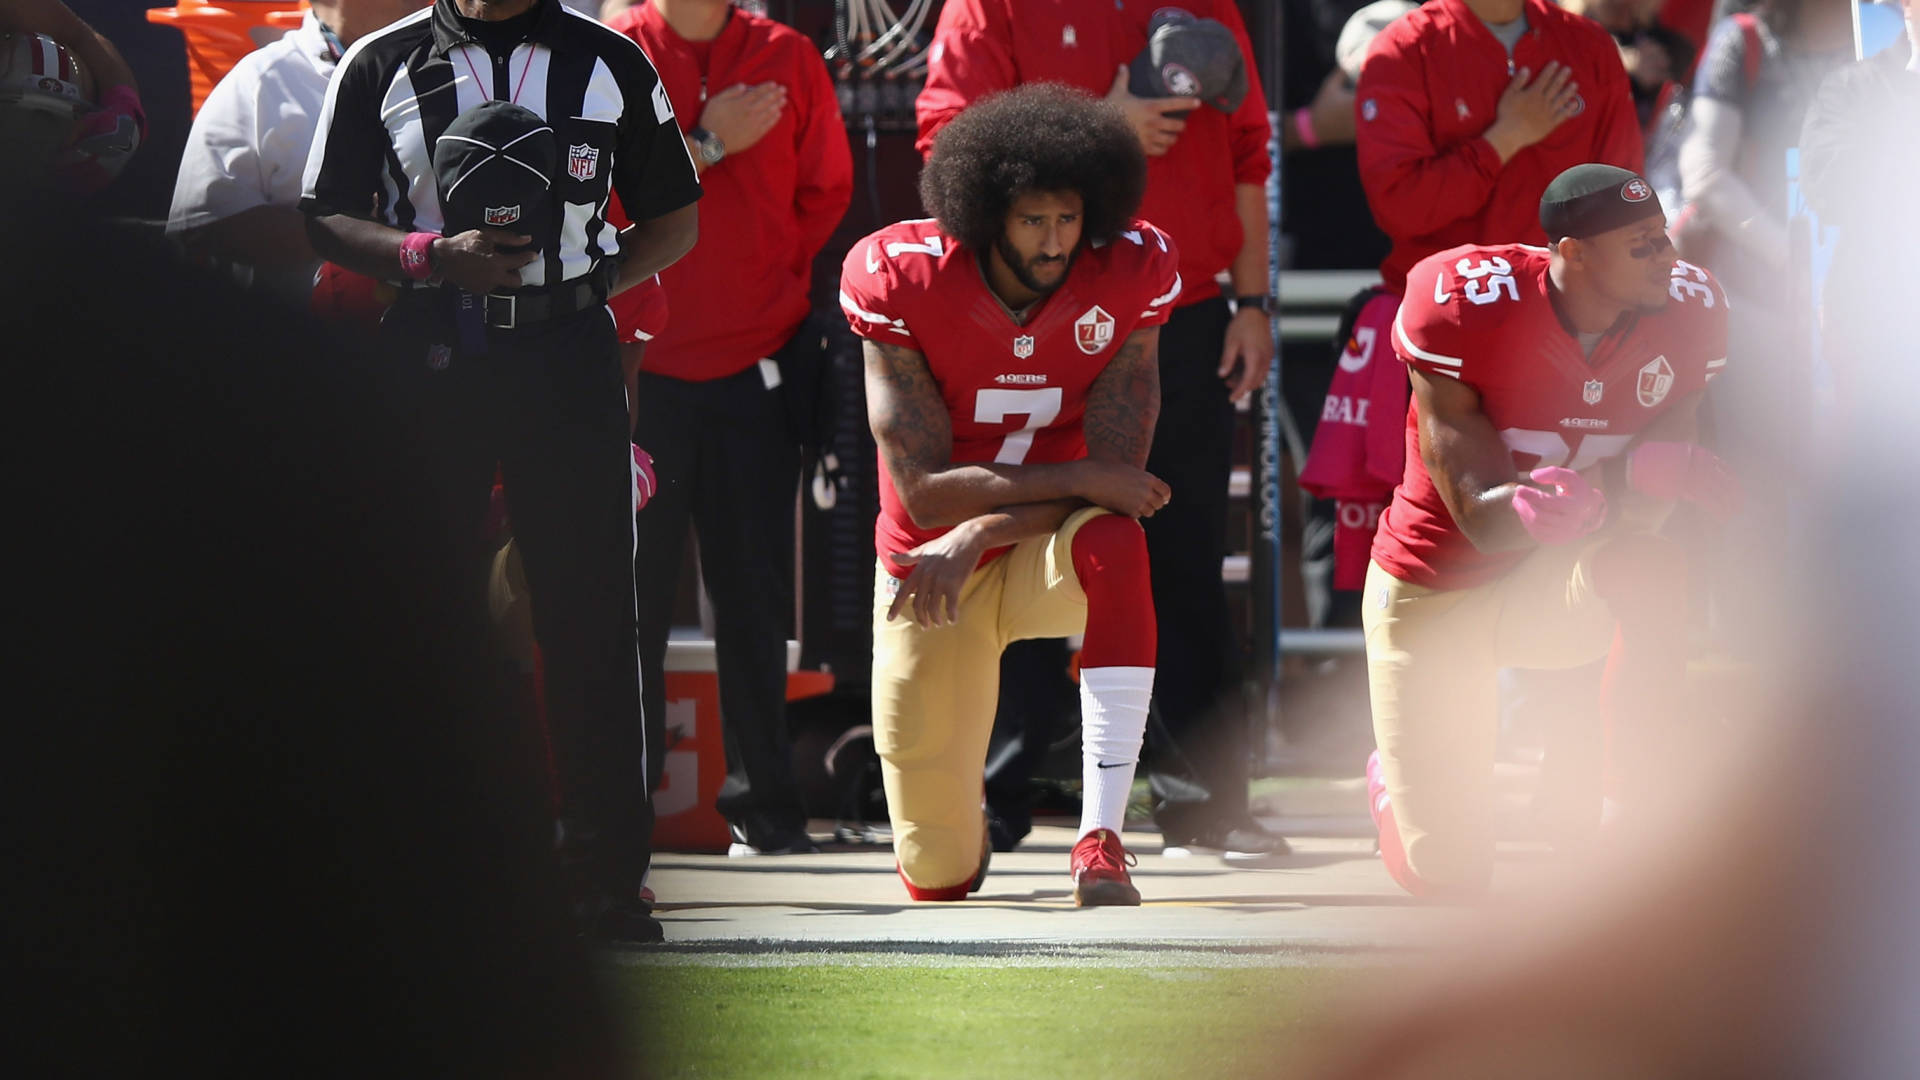 Colin Kaepernick kneels for the national anthem at Levi's Stadium in Santa Clara, Calif., on Oct. 23, 2016. Ezra Shaw/Getty Images